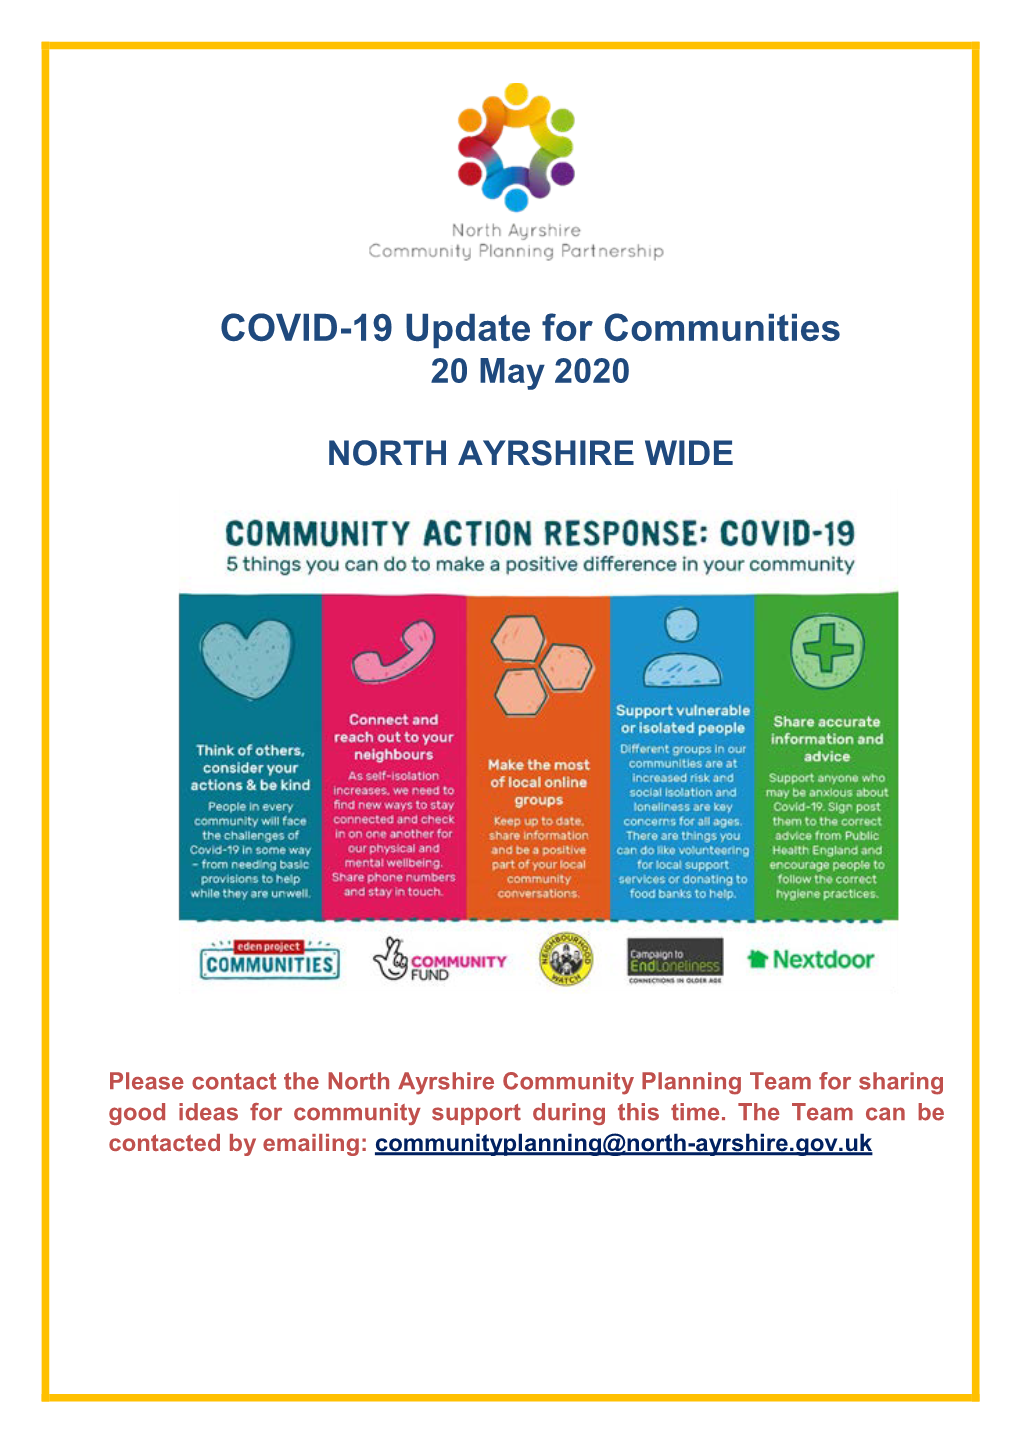 COVID-19 Update for Communities 20 May 2020